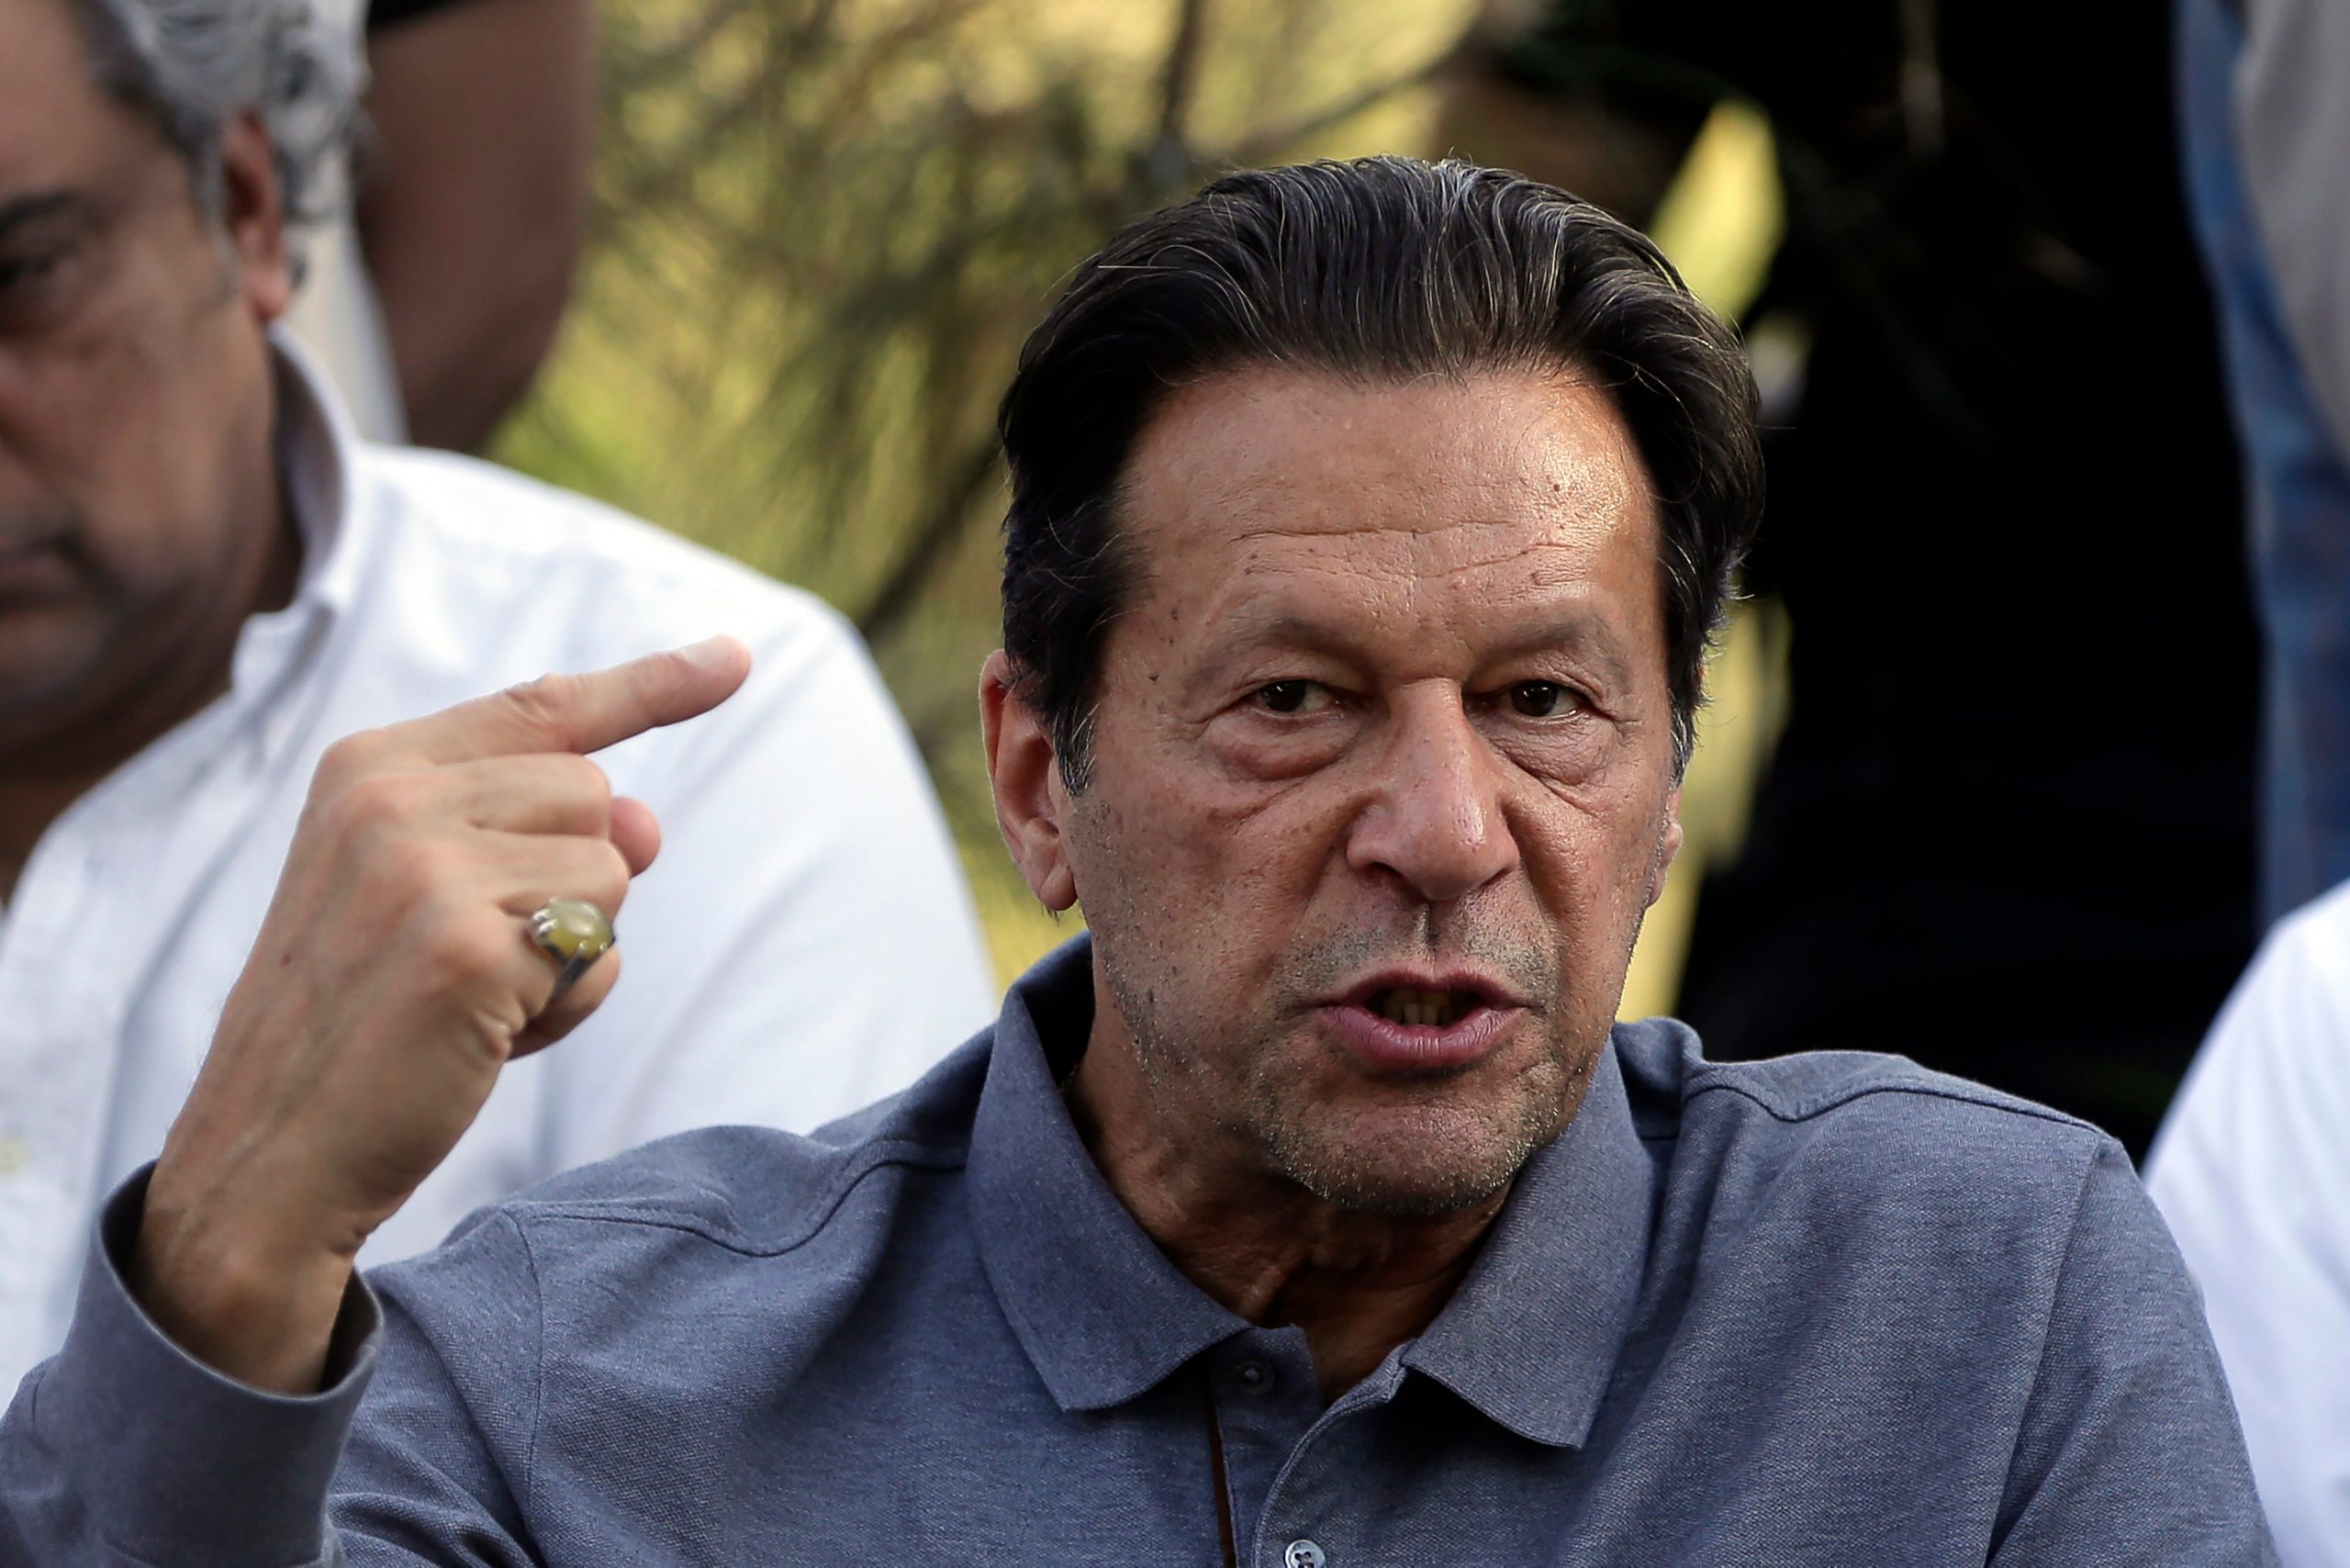 Imran Khan terrorism charge: All you need to know